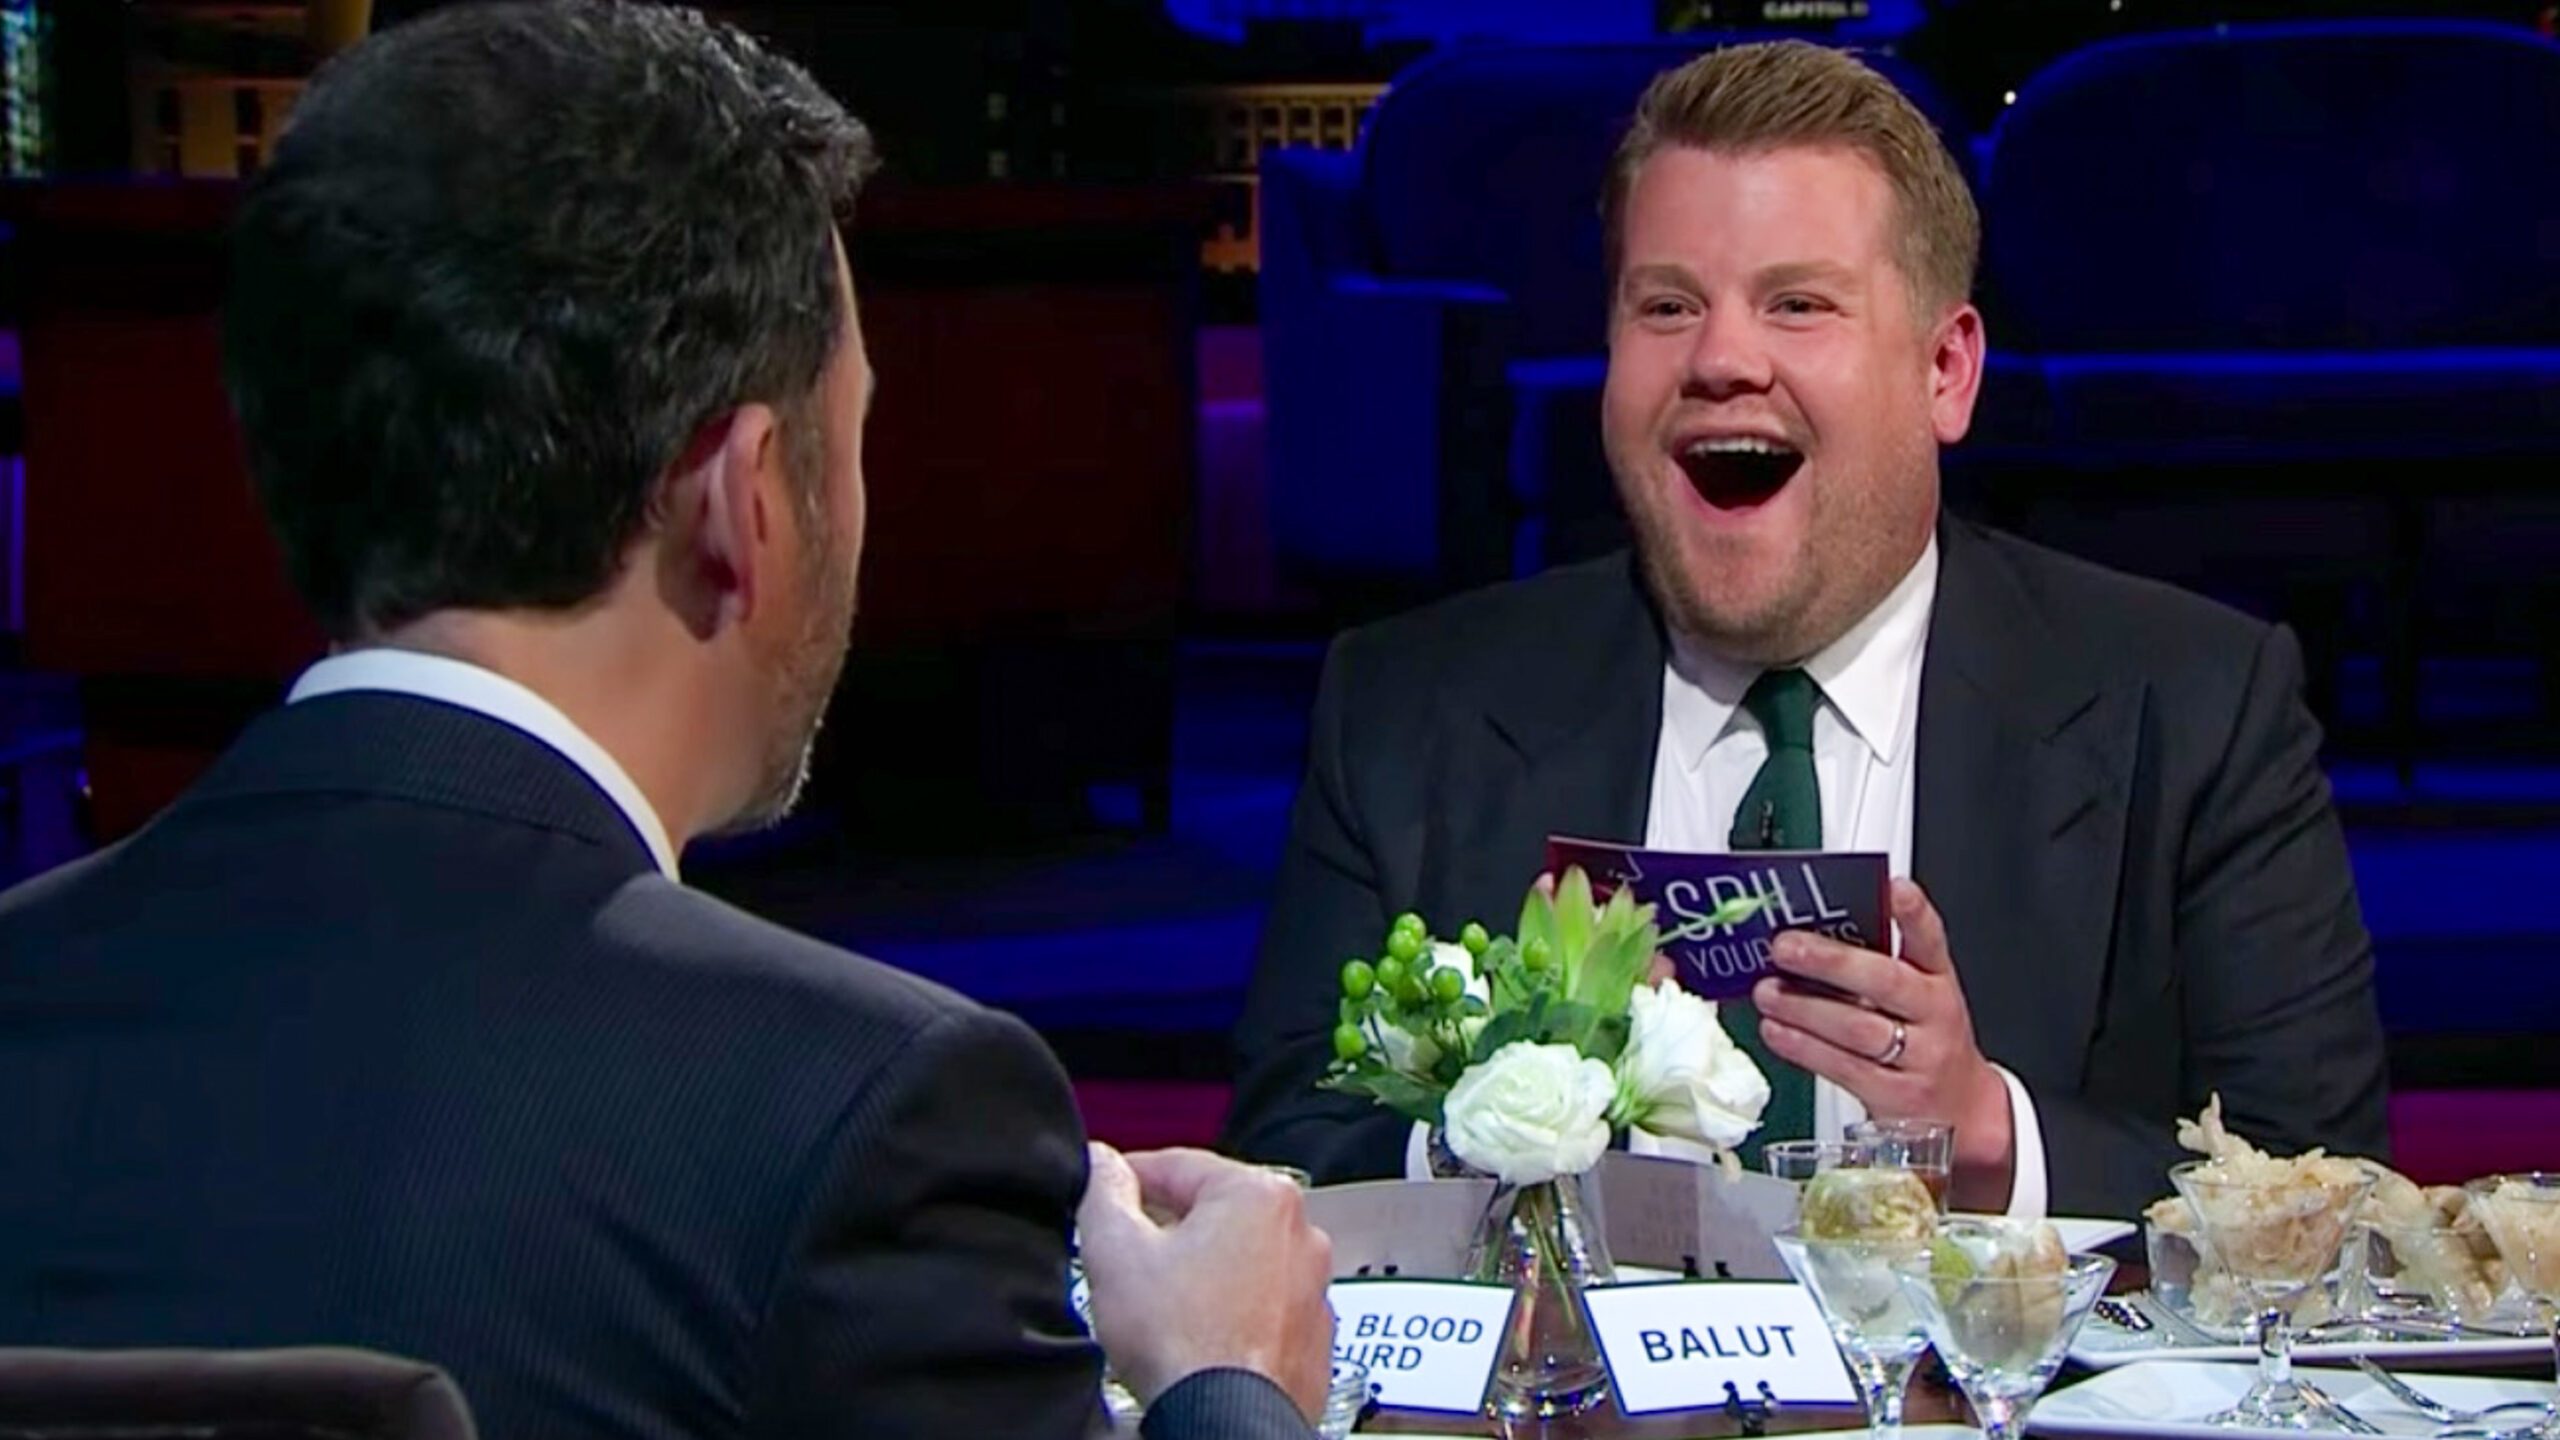 WATCH: James Corden chooses between answering awkward question or eating balut